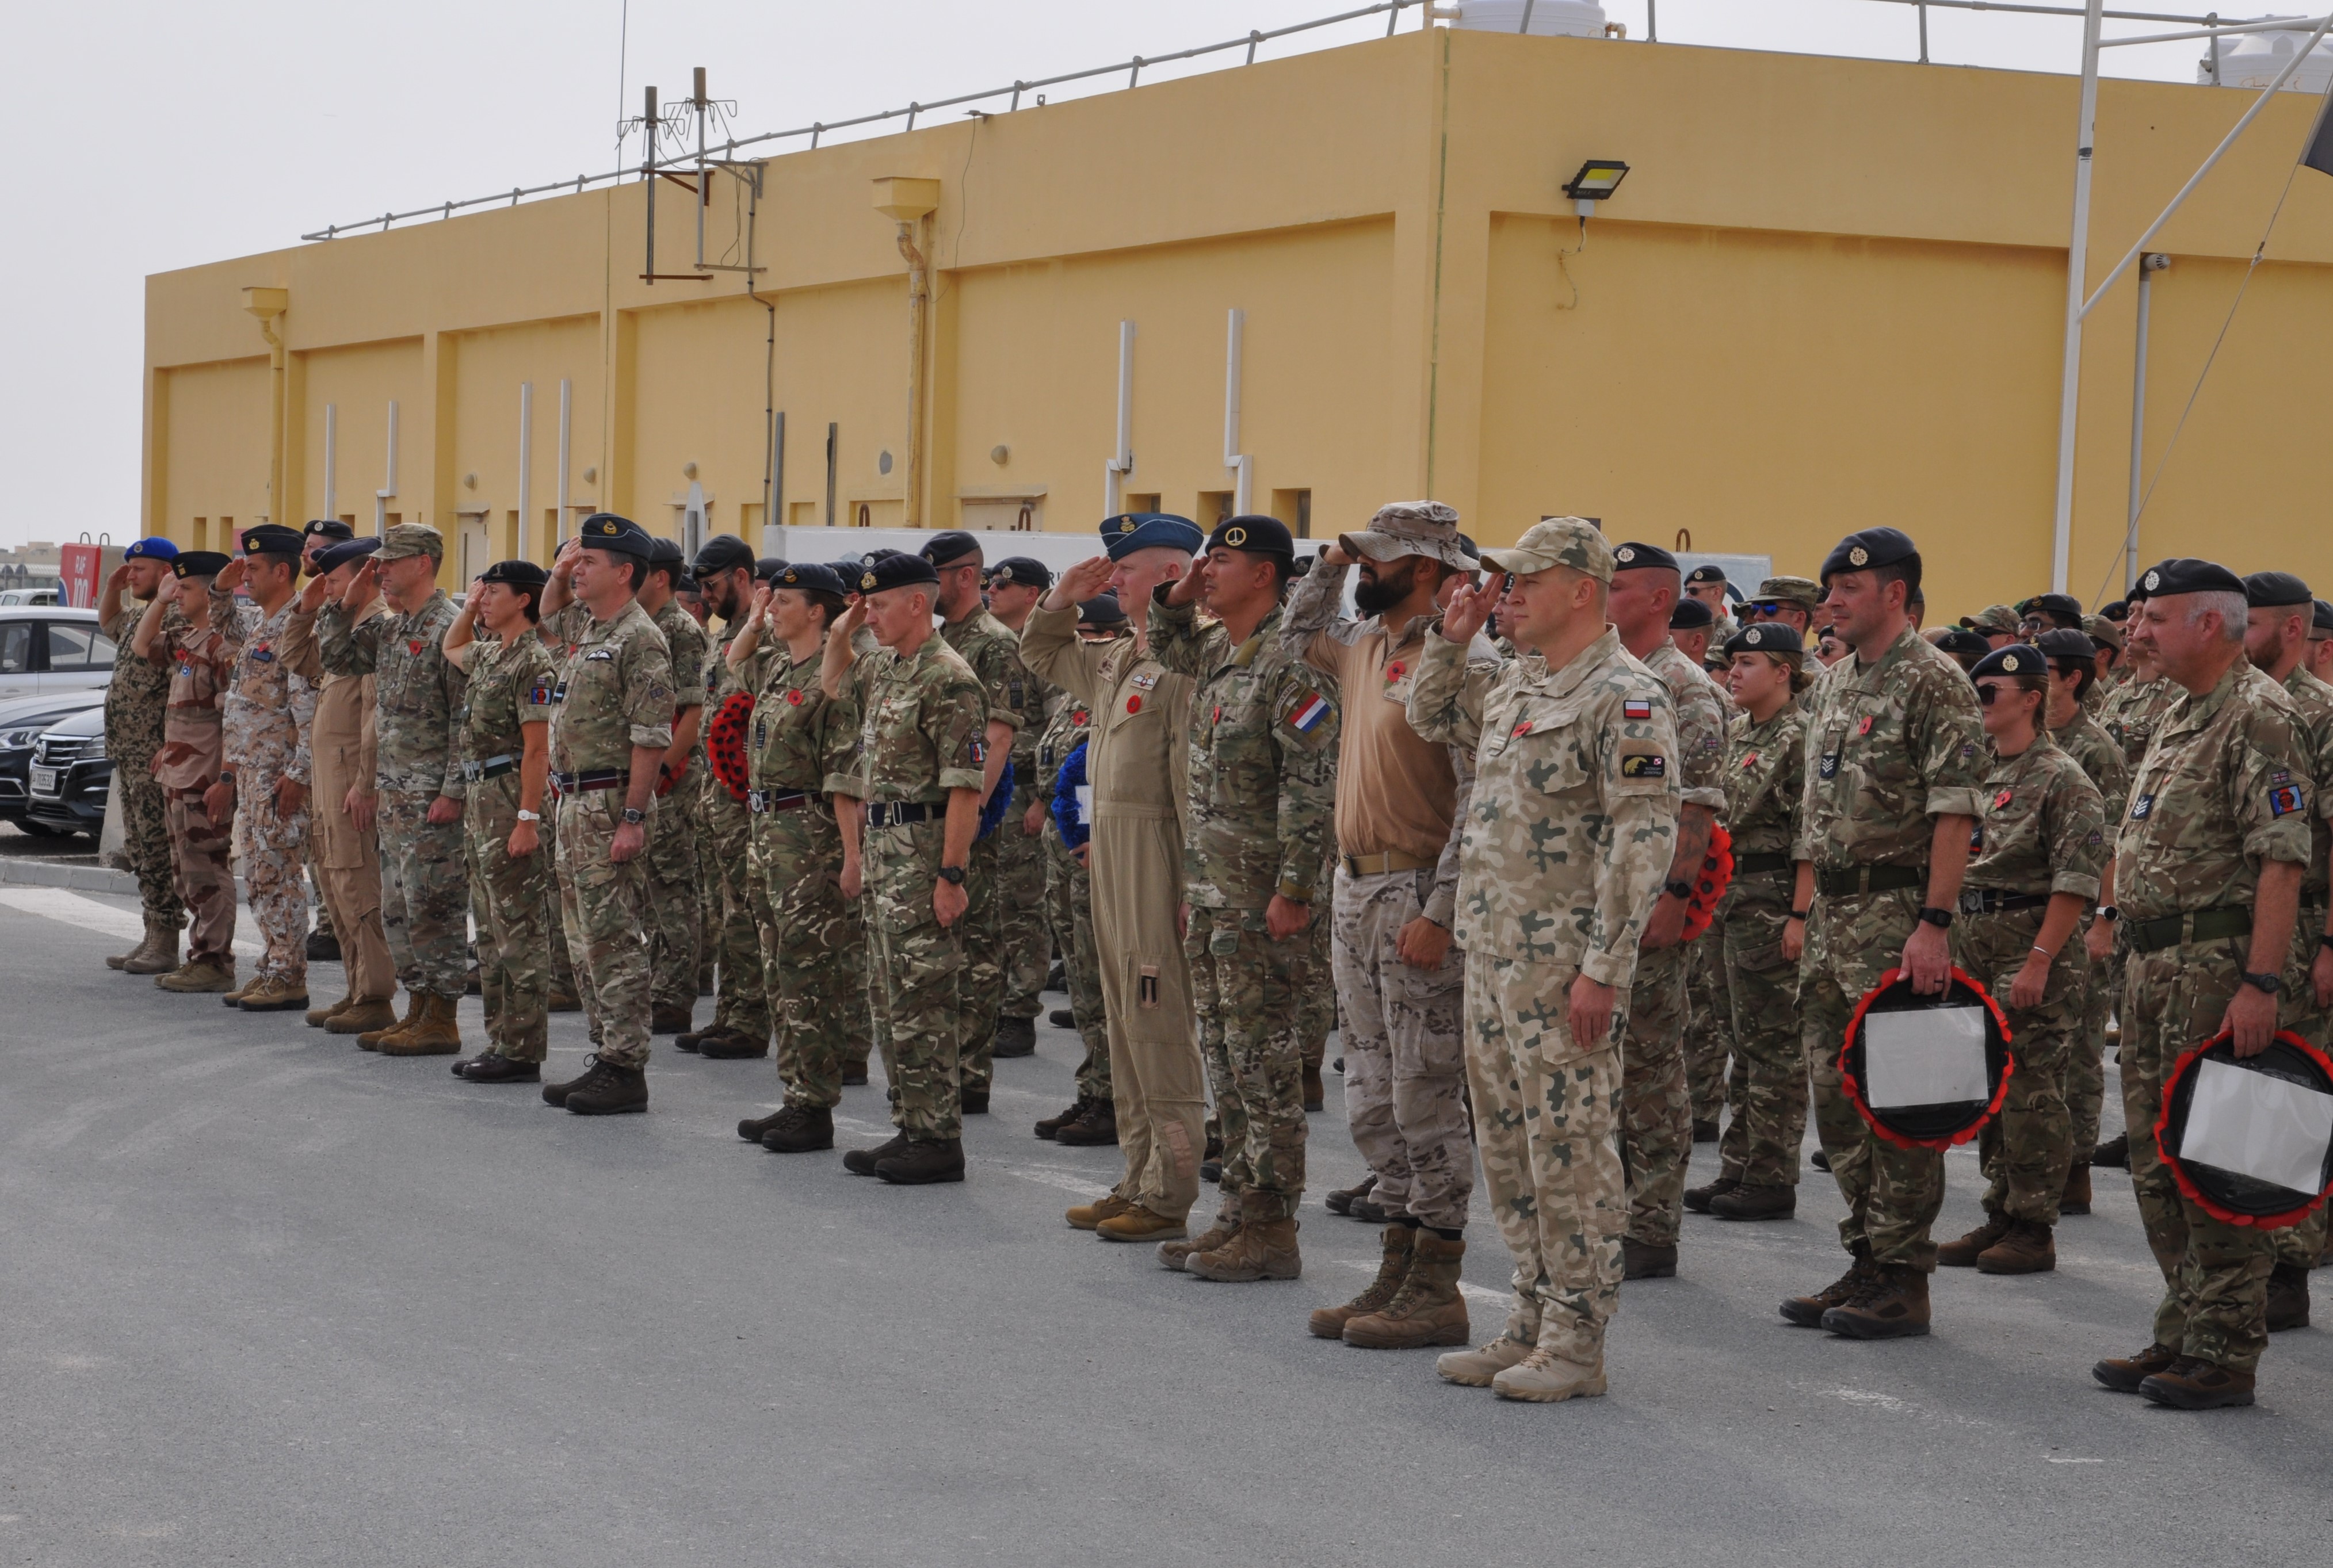 Personnel in teh Middle East standing on parade and saluting during the service